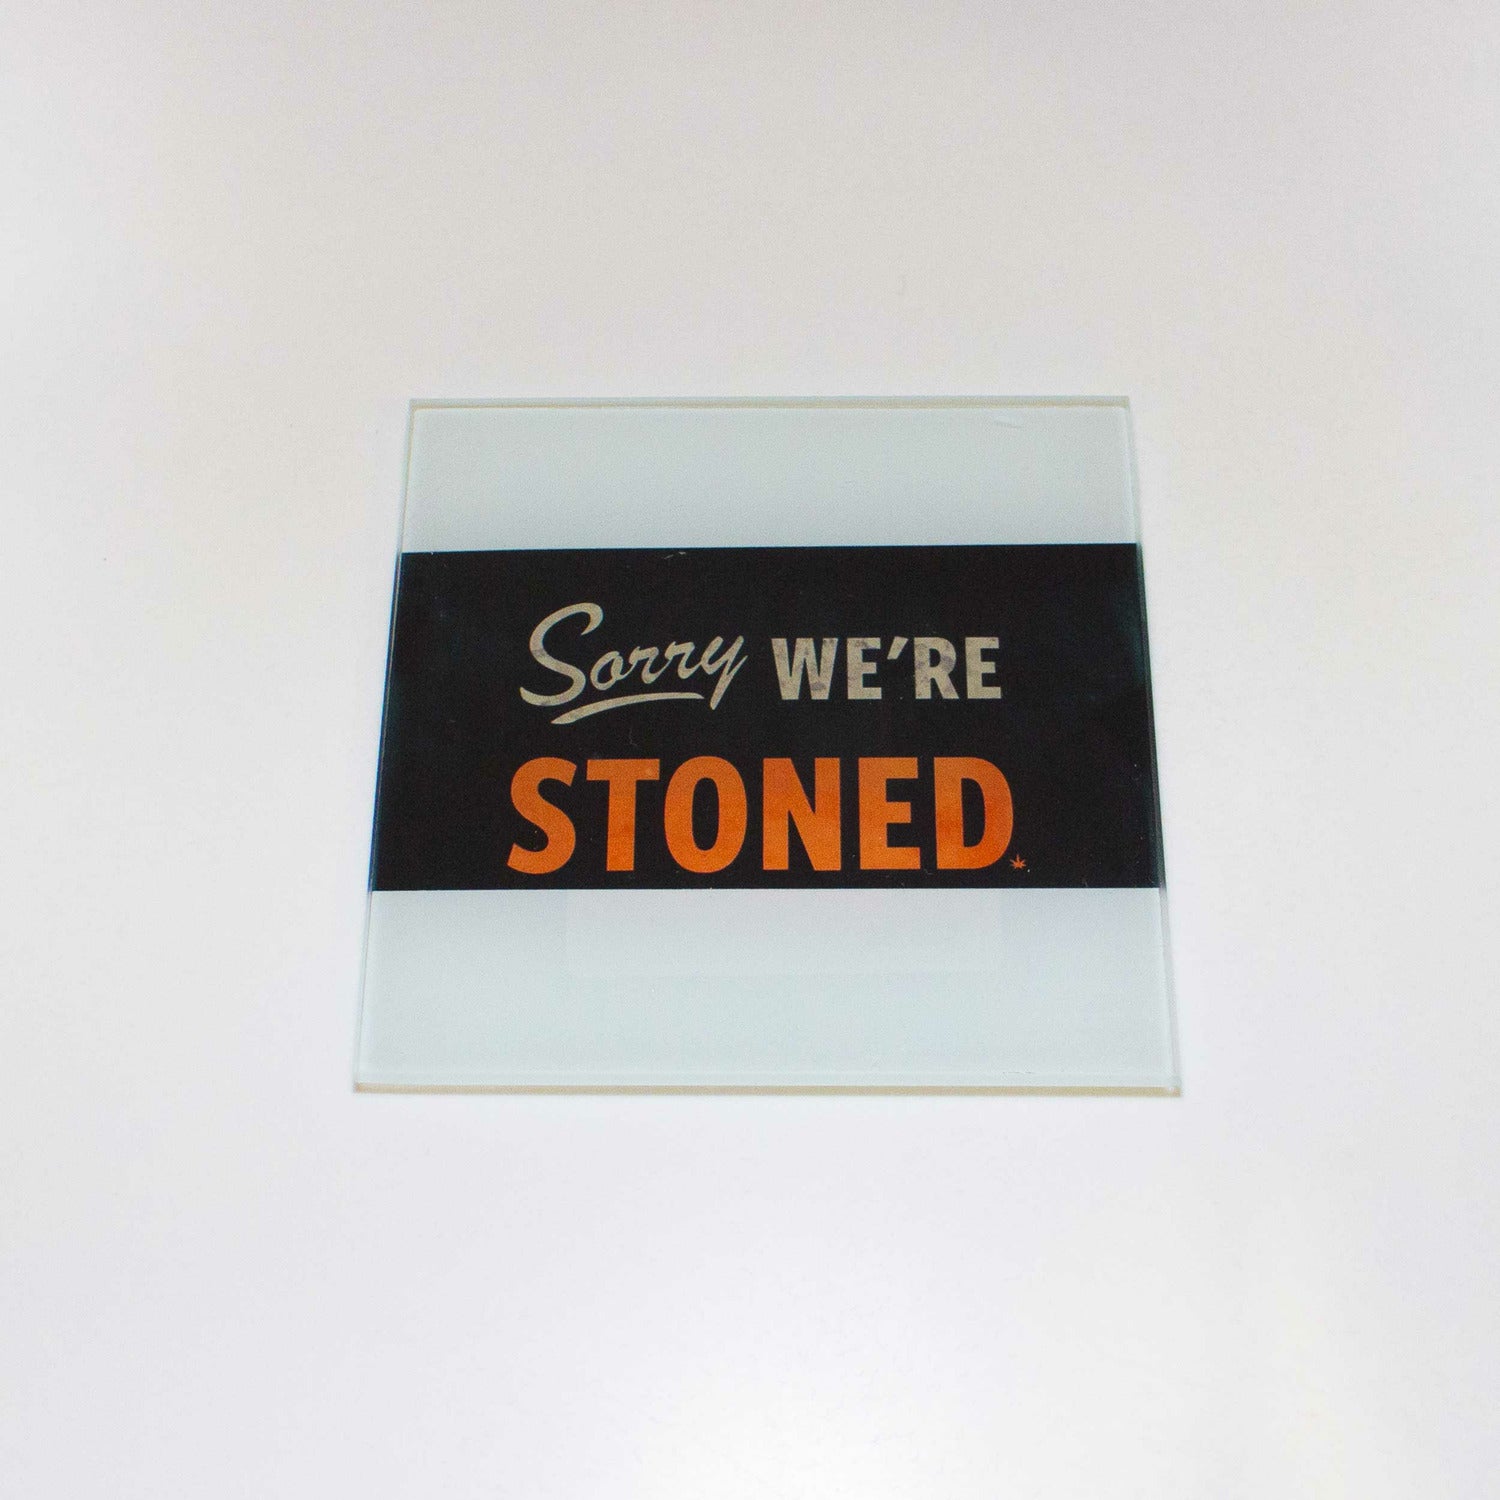 SORRY WE'RE STONED GLASS COASTER